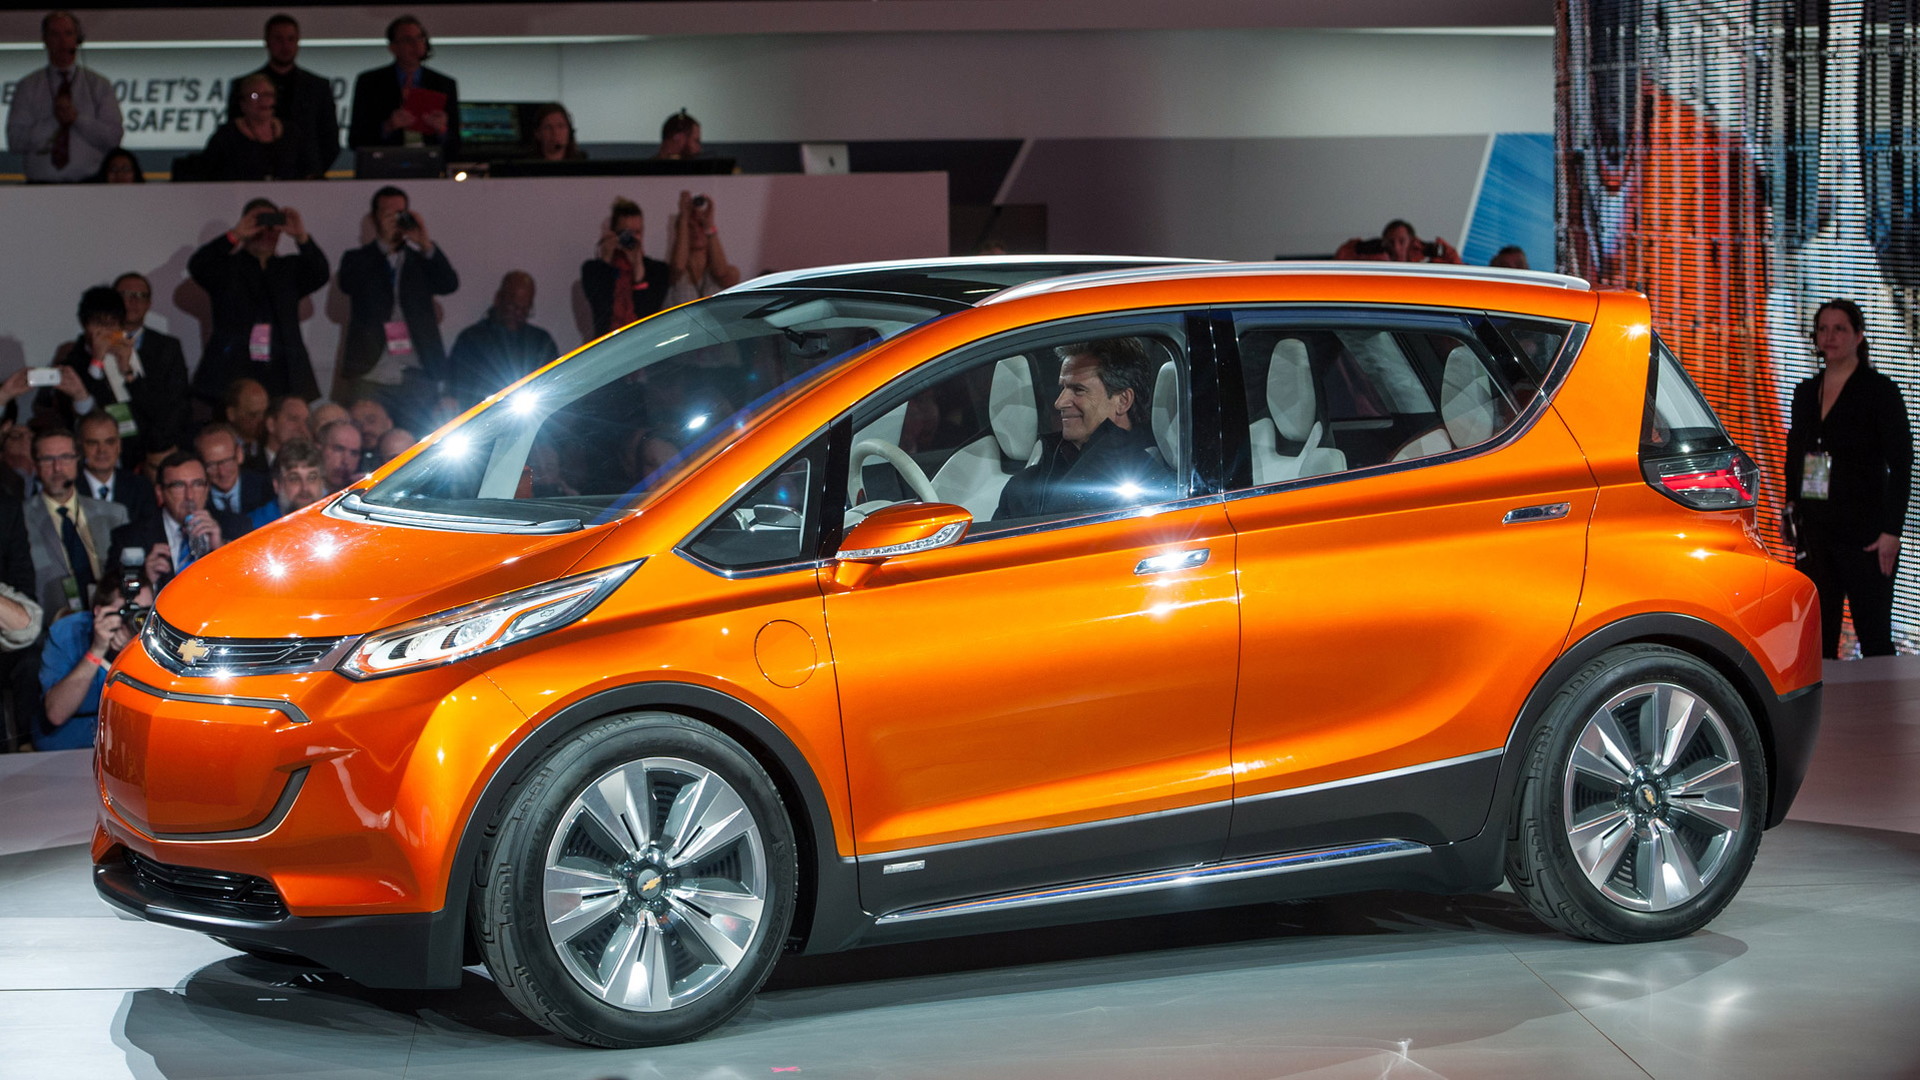 Chevy Previews 30K, 200Mile Electric Car With Bolt Concept Live